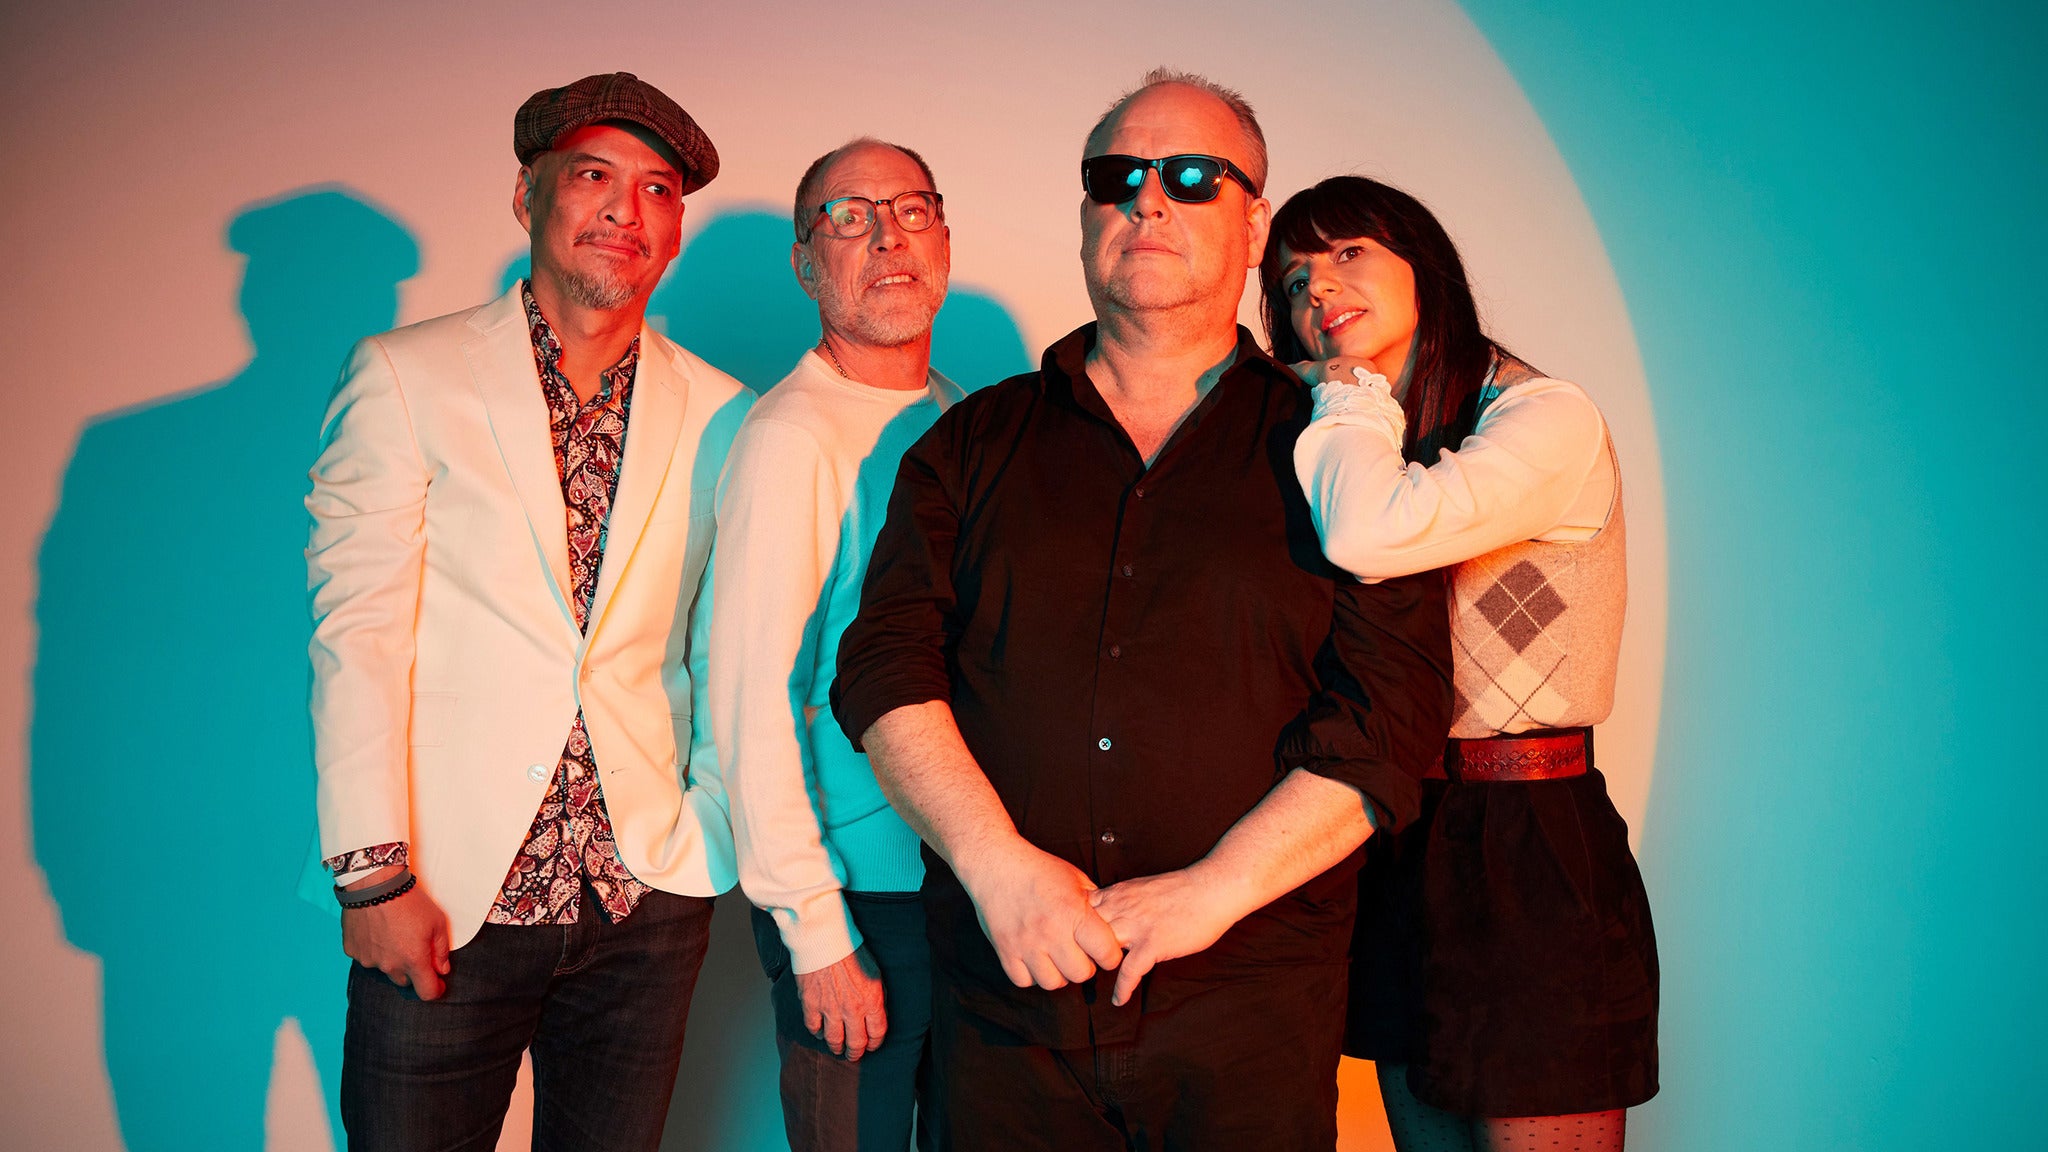 Image used with permission from Ticketmaster | Pixies tickets